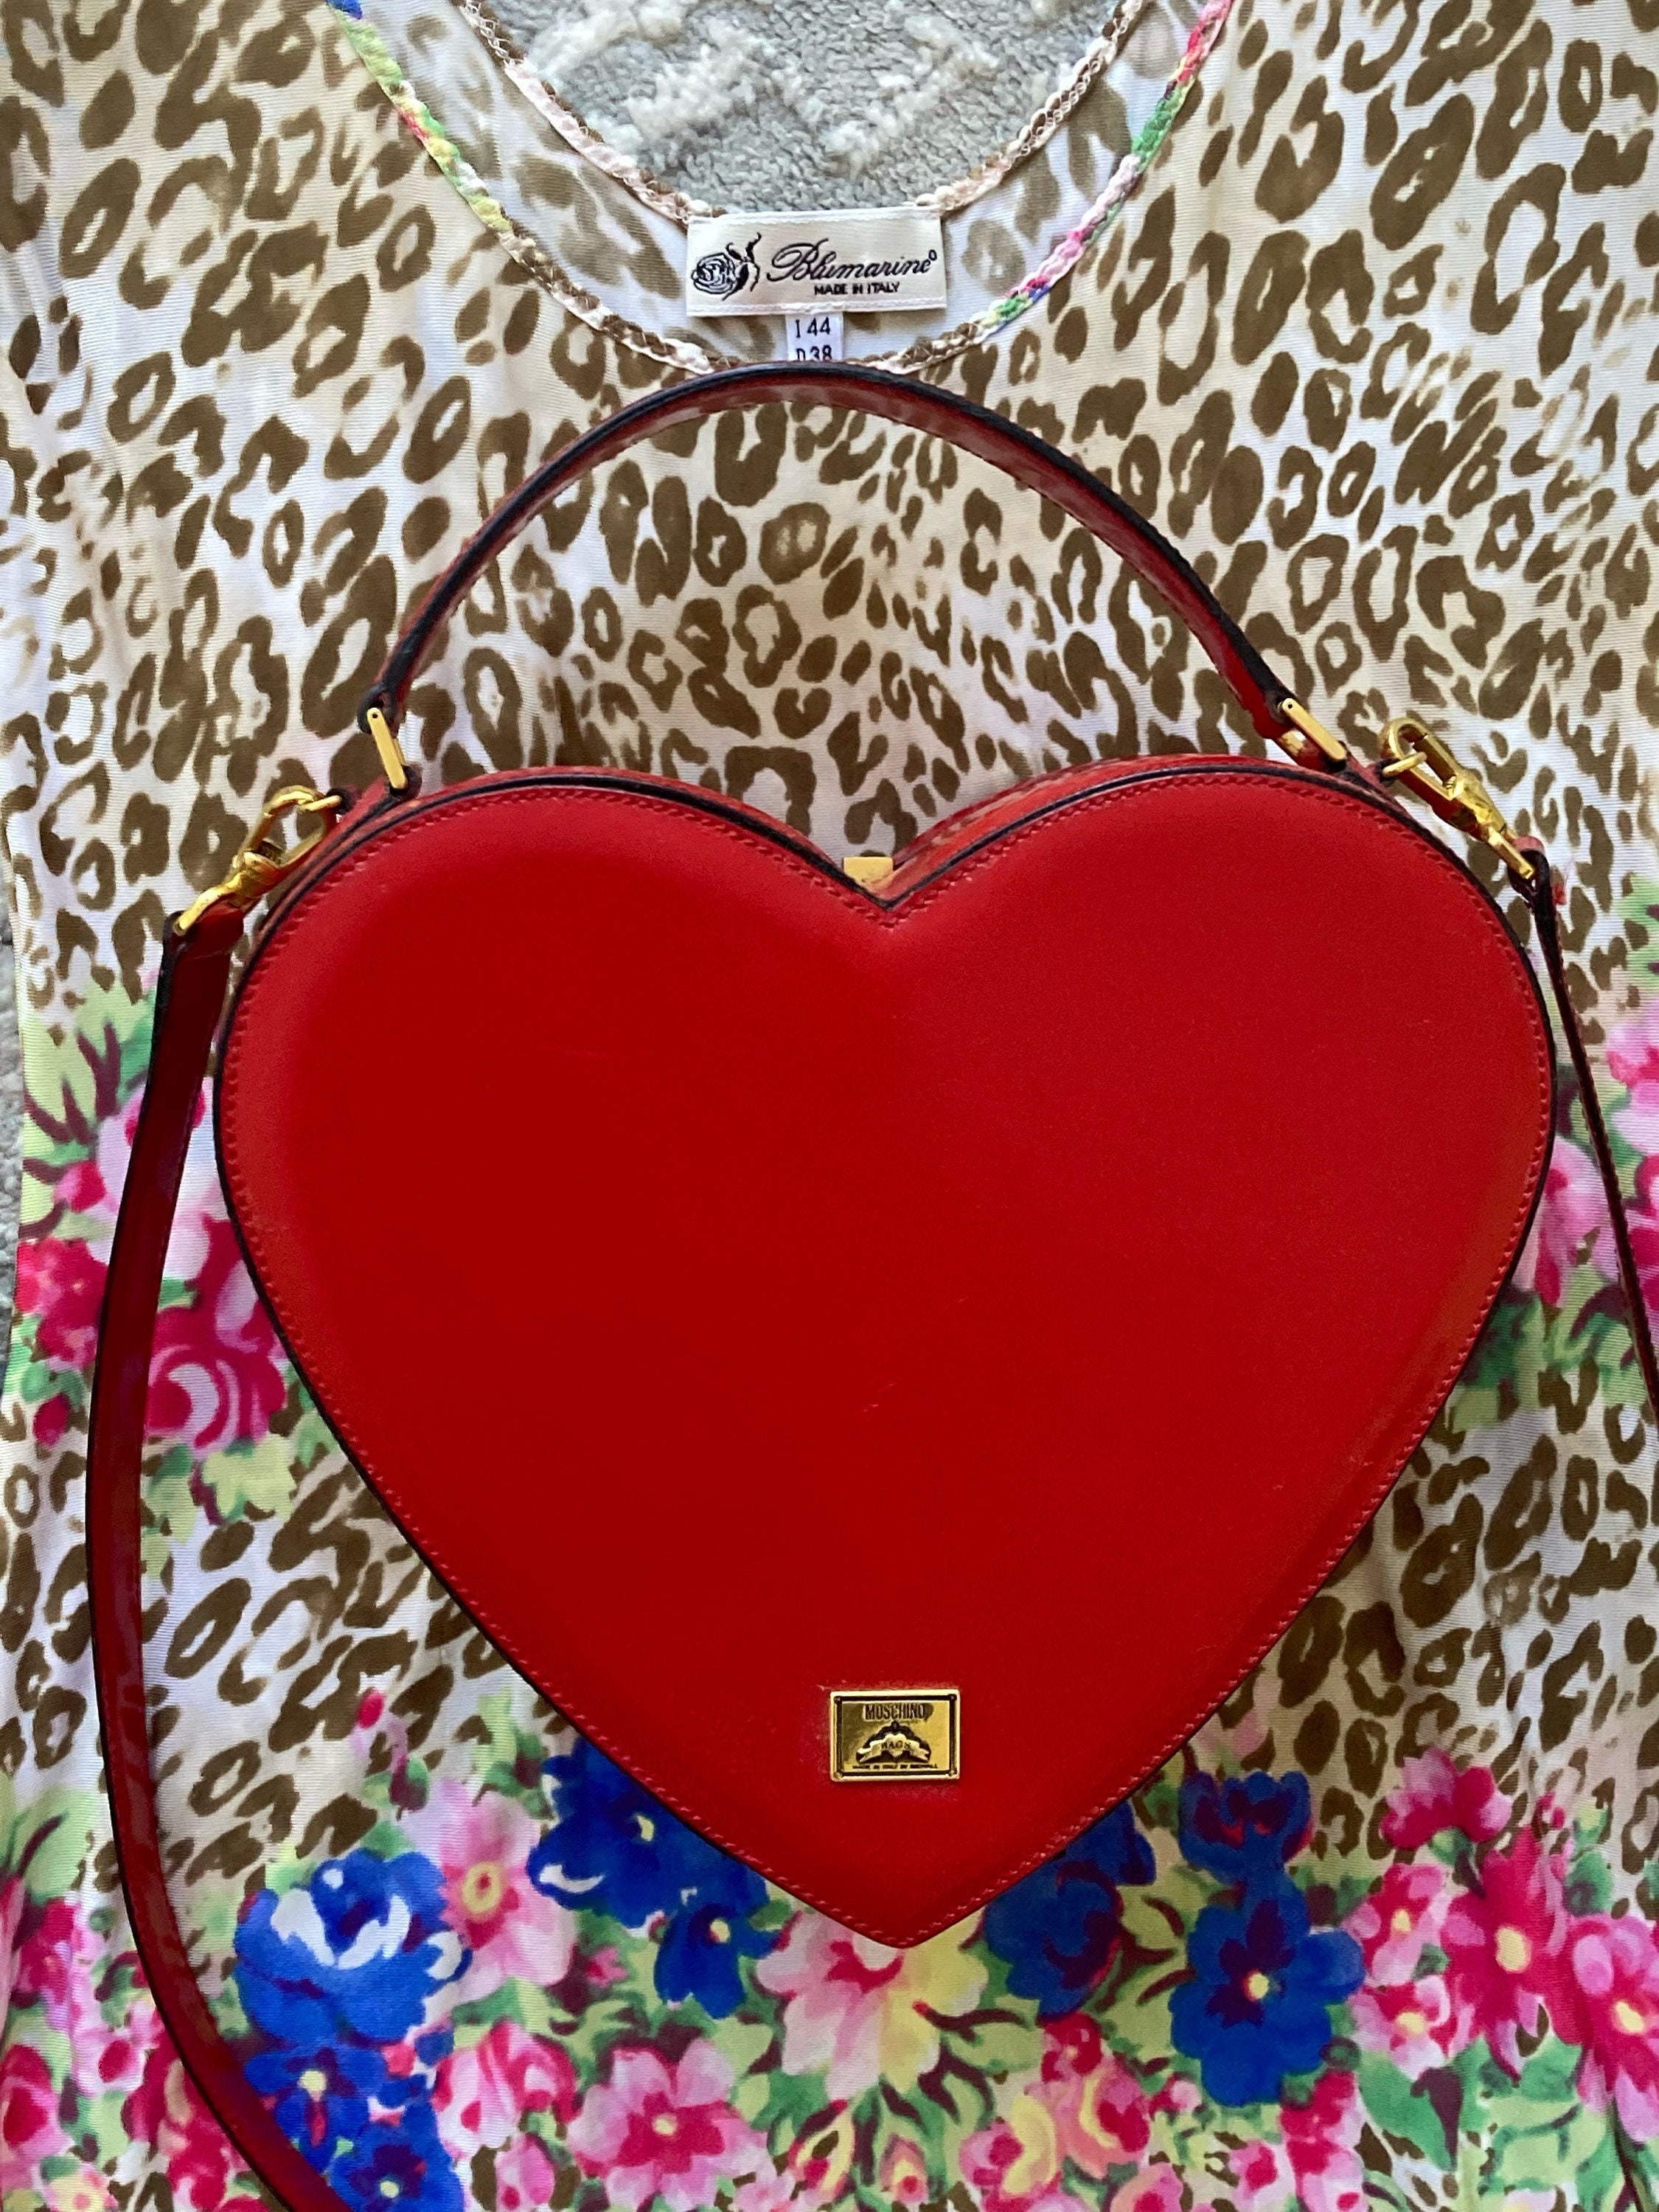 Style & Flair — thefinenanny: Moschino Heart Bag